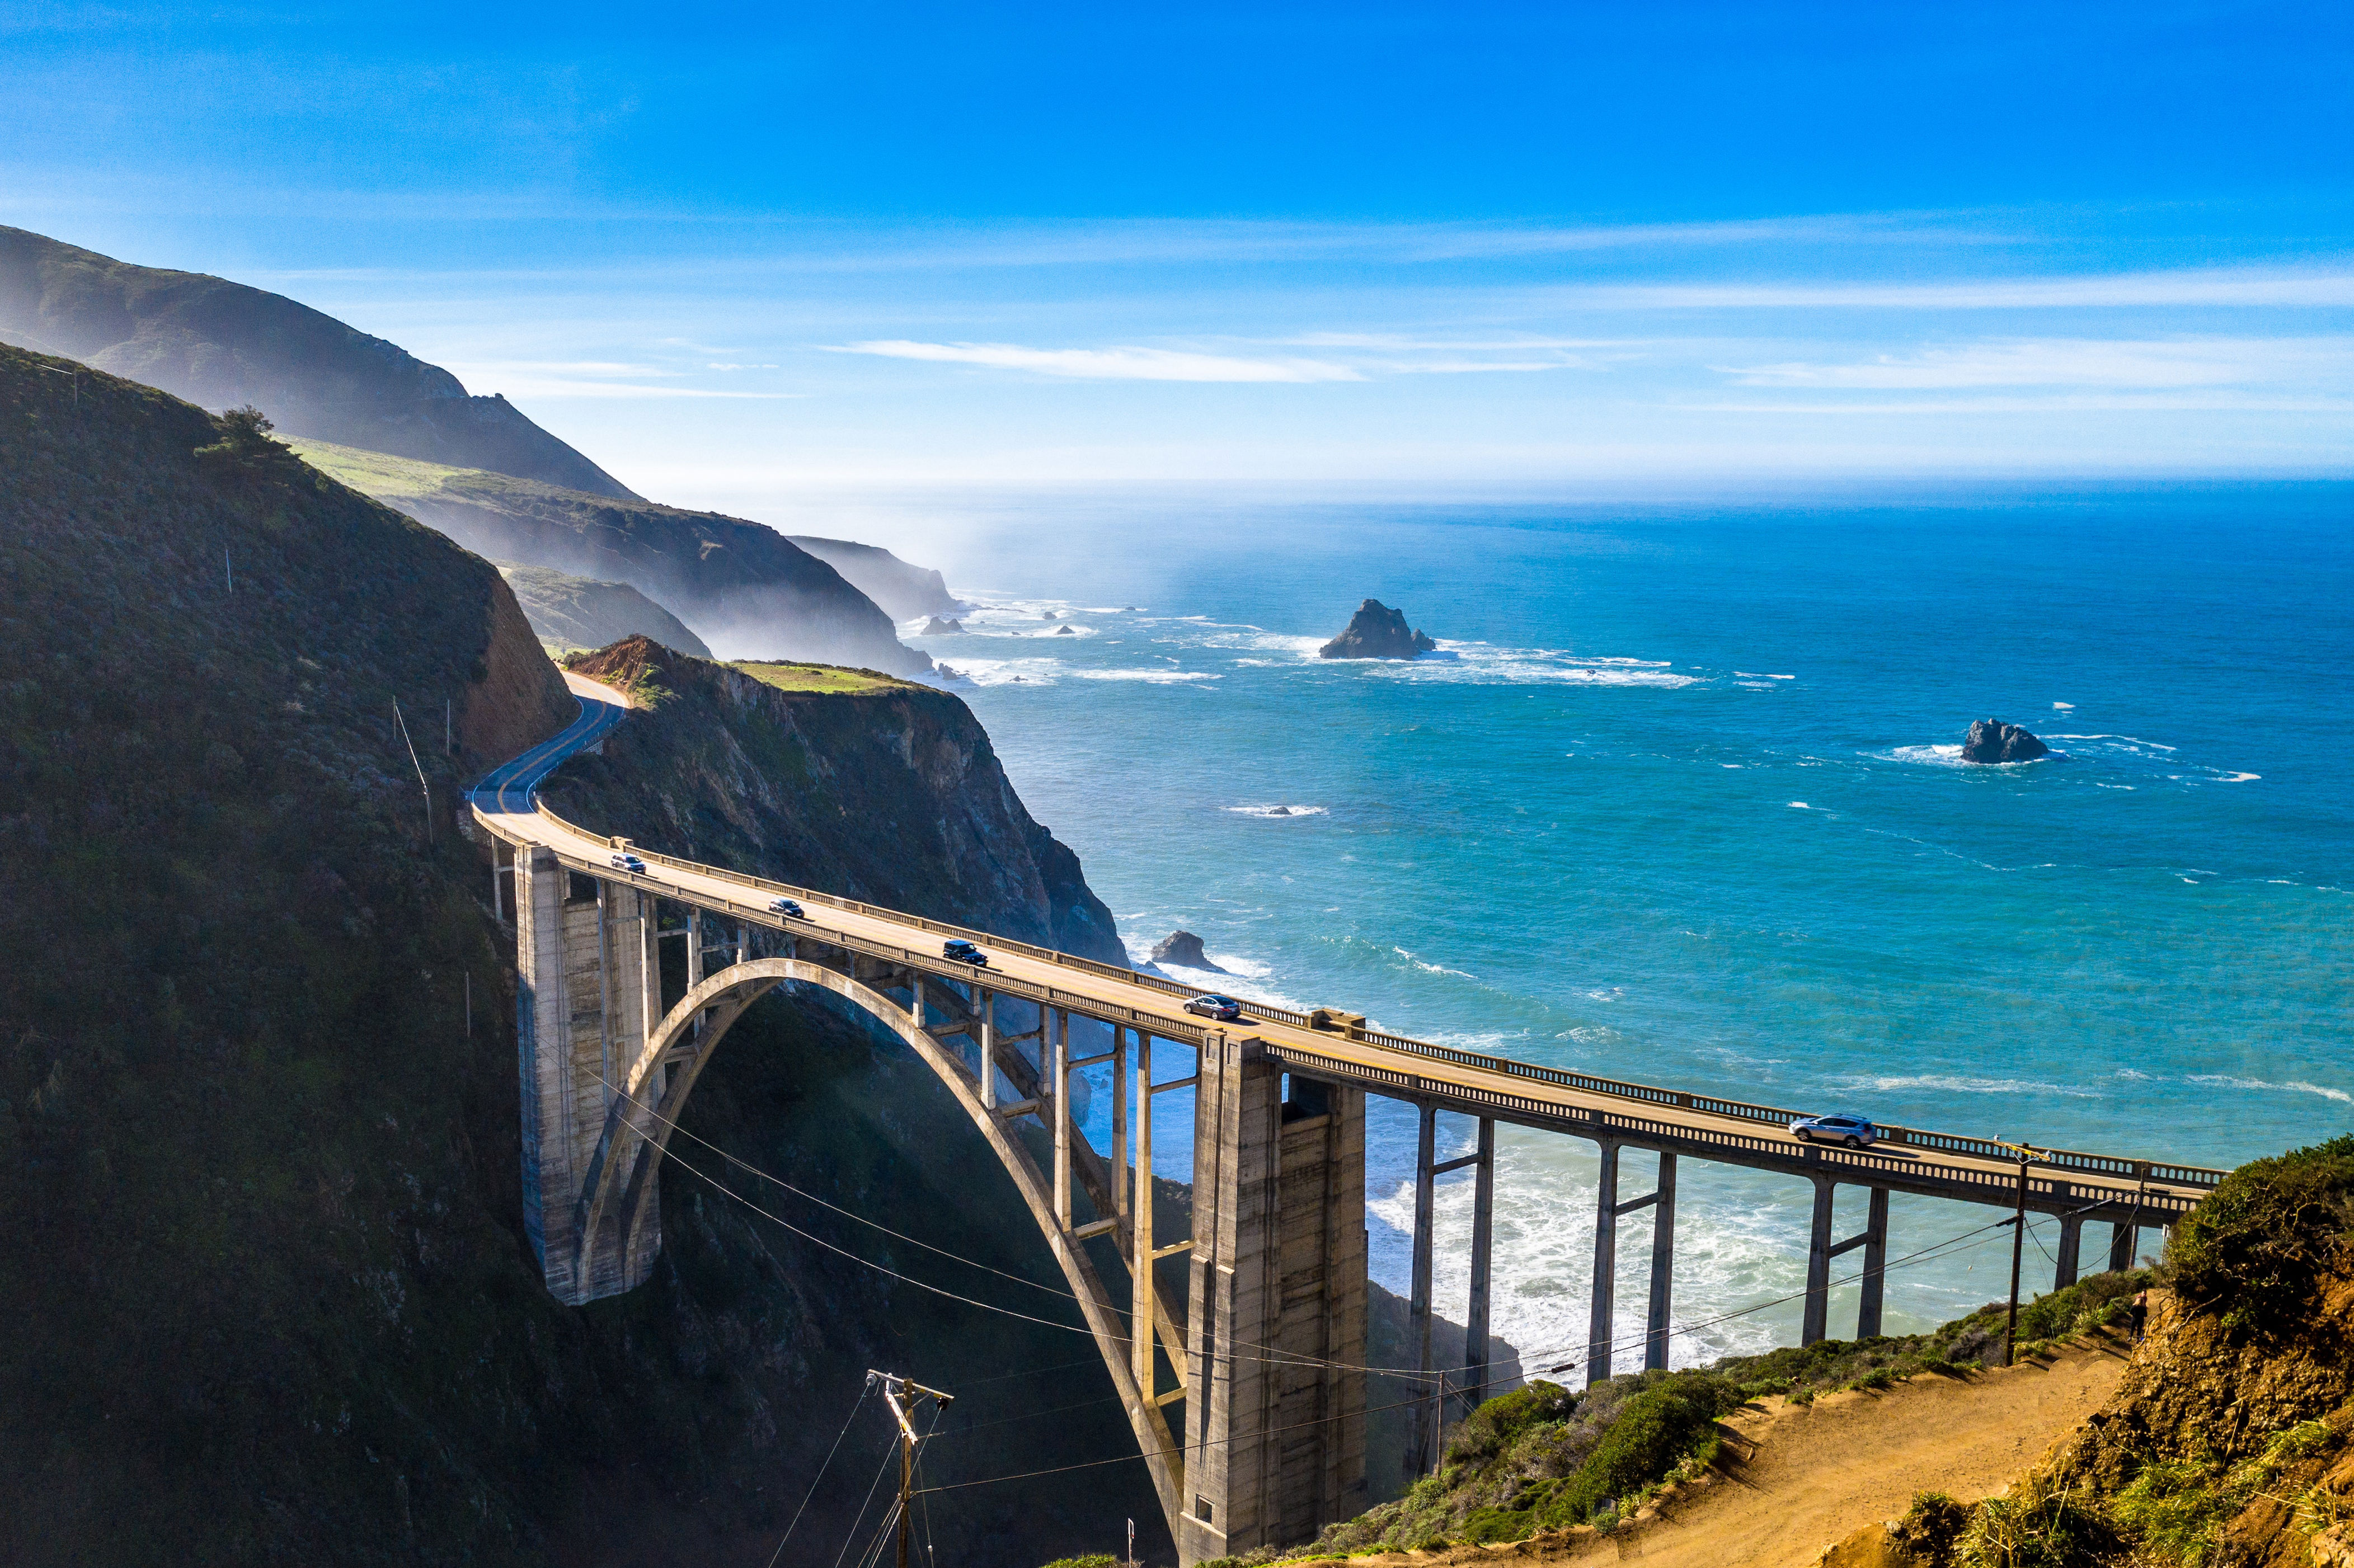 <p>To embrace every road trip cliché, rent a convertible and drive down the Pacific Coast Highway, or PCH, a cliff-hugging, exhilarating 123-mile drive along the central California coast. Start in <a href="https://www.cntraveler.com/destinations/san-francisco?mbid=synd_msn_rss&utm_source=msn&utm_medium=syndication">San Francisco</a> and drive southbound, as you’ll be closer to the ocean. Charming coastal towns like Monterey and Carmel-by-the-Sea give way to the rugged emptiness of Big Sur, before you hit the central Coast and the architectural sugar rush of Hearst Castle. Allow four or five days, if you don’t want to rush.</p> <p><strong>Where to stop:</strong> Other than Hearst Castle, the over-the-top estate that’s equal parts tribute to William Randolph’s deep pockets and magpie-like instincts, the outdoors is the main allure here. On the northern reaches of Big Sur, just 15 miles south of Carmel, stop to take an obligatory photo of the Bixby Bridge, one of the tallest concrete bridges in the world. For hiking, head to <a href="http://www.parks.ca.gov/?page_id=578">Julia Pfeiffer Burns State Park</a> in Monterey County, which has an easy path that leads to the overlook for the 80-foot high McWay Falls.</p> <p><strong>Where to eat:</strong> Ritzy Carmel-by-the-Sea has a food scene that is just as upscale as the surroundings: local fish is the backbone of the cooking at Chef <a href="http://www.chefjustincogley.com/">Justin Cogley's</a> Aubergine, while <a href="https://www.iltegamino.com/">Il Tegamino</a> serves up the high-end Italian comfort food.</p> <p><strong>Where to stay:</strong> Splurge on a night or two at the luxe eco-retreat clifftop <a href="https://www.cntraveler.com/hotels/united-states/big-sur/post-ranch-inn-big-sur?mbid=synd_msn_rss&utm_source=msn&utm_medium=syndication">Post Ranch Inn</a> in <a href="https://www.cntraveler.com/story/best-big-sur-hotels?mbid=synd_msn_rss&utm_source=msn&utm_medium=syndication">Big Sur</a>. The rooms have floor-to-ceiling windows with a view of the crashing ocean around you. Take a dip in the infinity pool, which hangs 1,200 feet over the sea below. Treebones Resort is another great option for more of a glamping experience. After resting your head, start the day with morning yoga, or take in the view of the Pacific from your private deck.</p><p>Sign up to receive the latest news, expert tips, and inspiration on all things travel</p><a href="https://www.cntraveler.com/newsletter/the-daily?sourceCode=msnsend">Inspire Me</a>